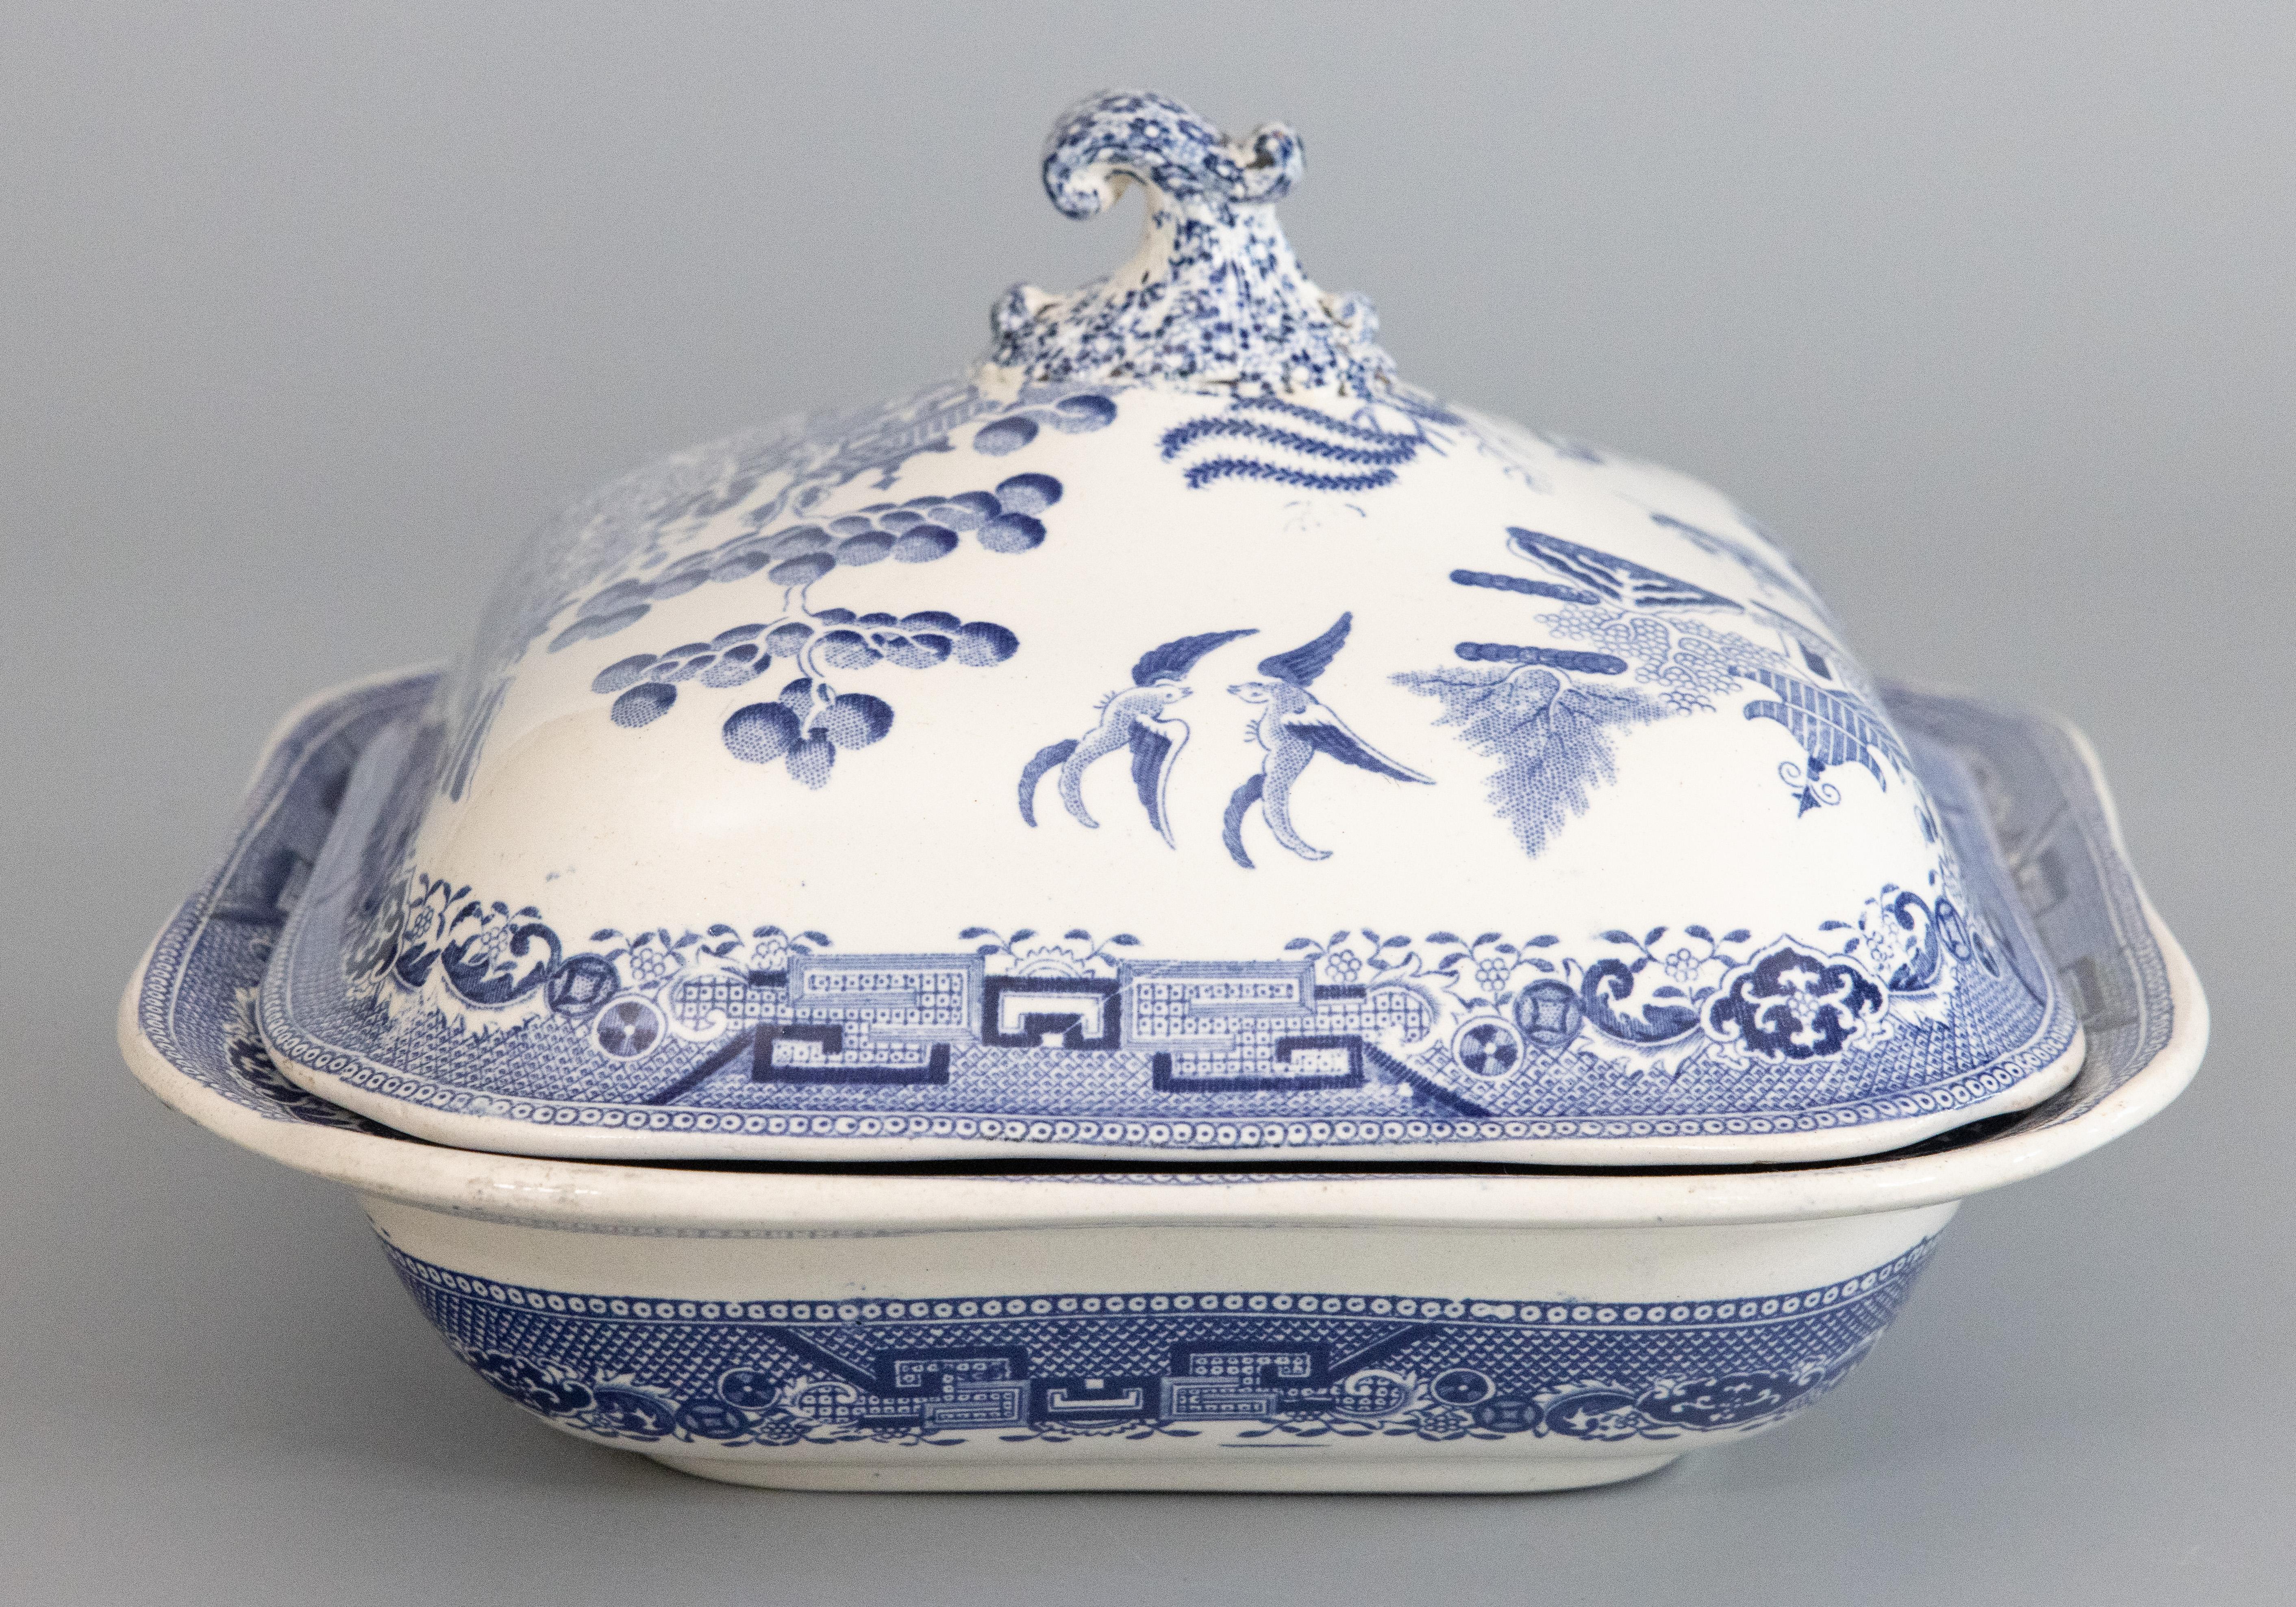 A superb antique English Staffordshire transferware serving dish / covered vegetable casserole dish / lidded tureen in the classic Blue Willow pattern, circa 1820. This fine dish has a nice square shape, beautiful blue and white chinoiserie design,